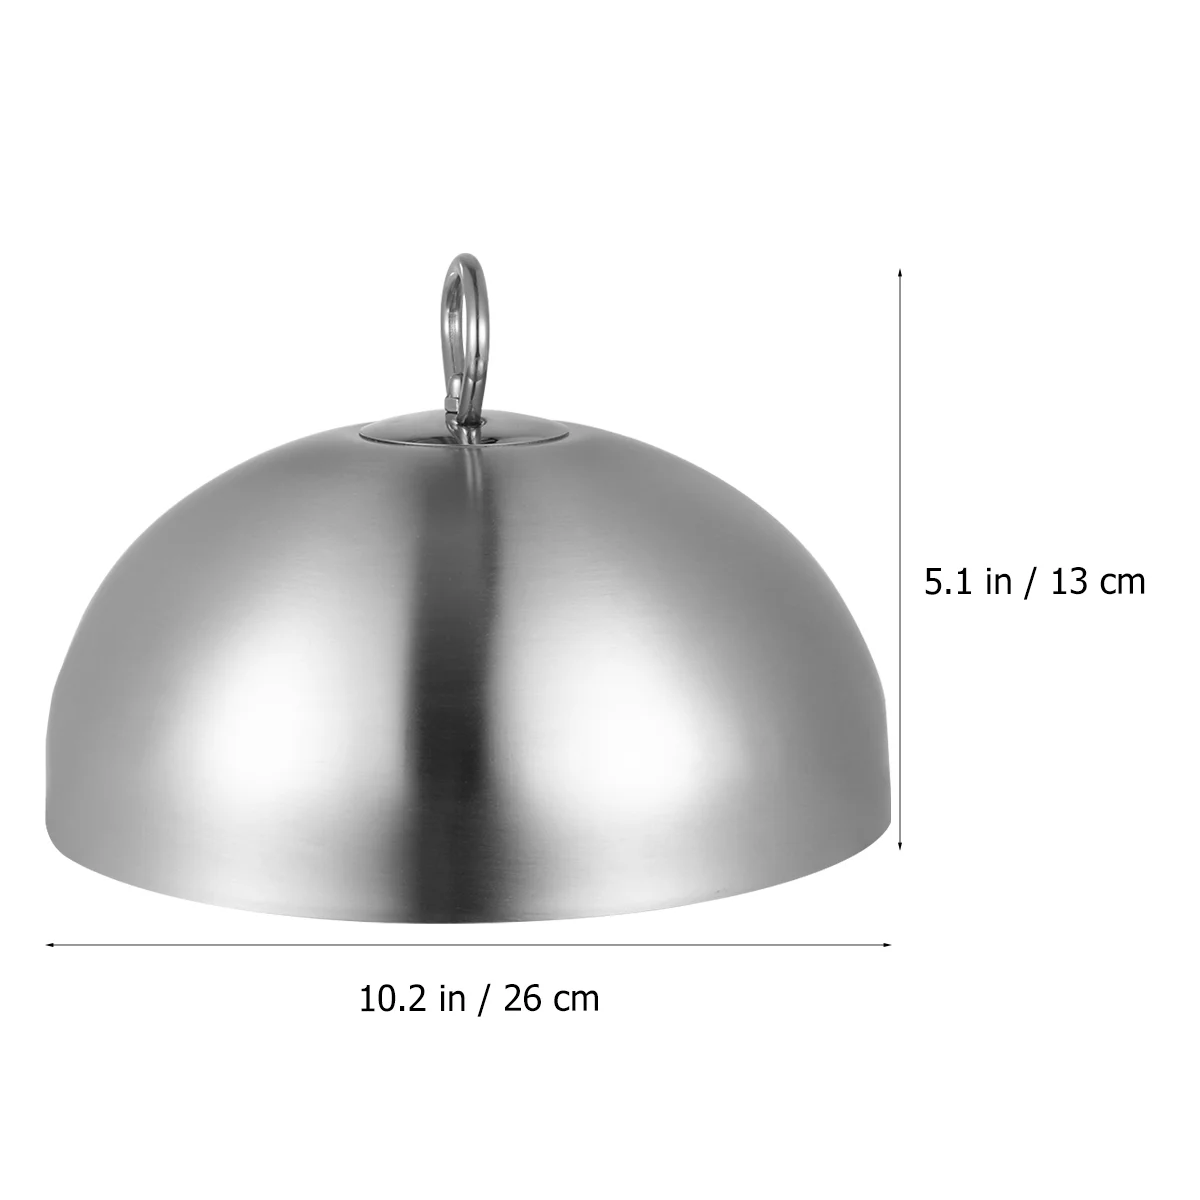 

Stainless Steel Basting Cover Round Cheese Melting Griddle Dome Basting Steaming Cover Lid Cover for Bacon Steak 26cm